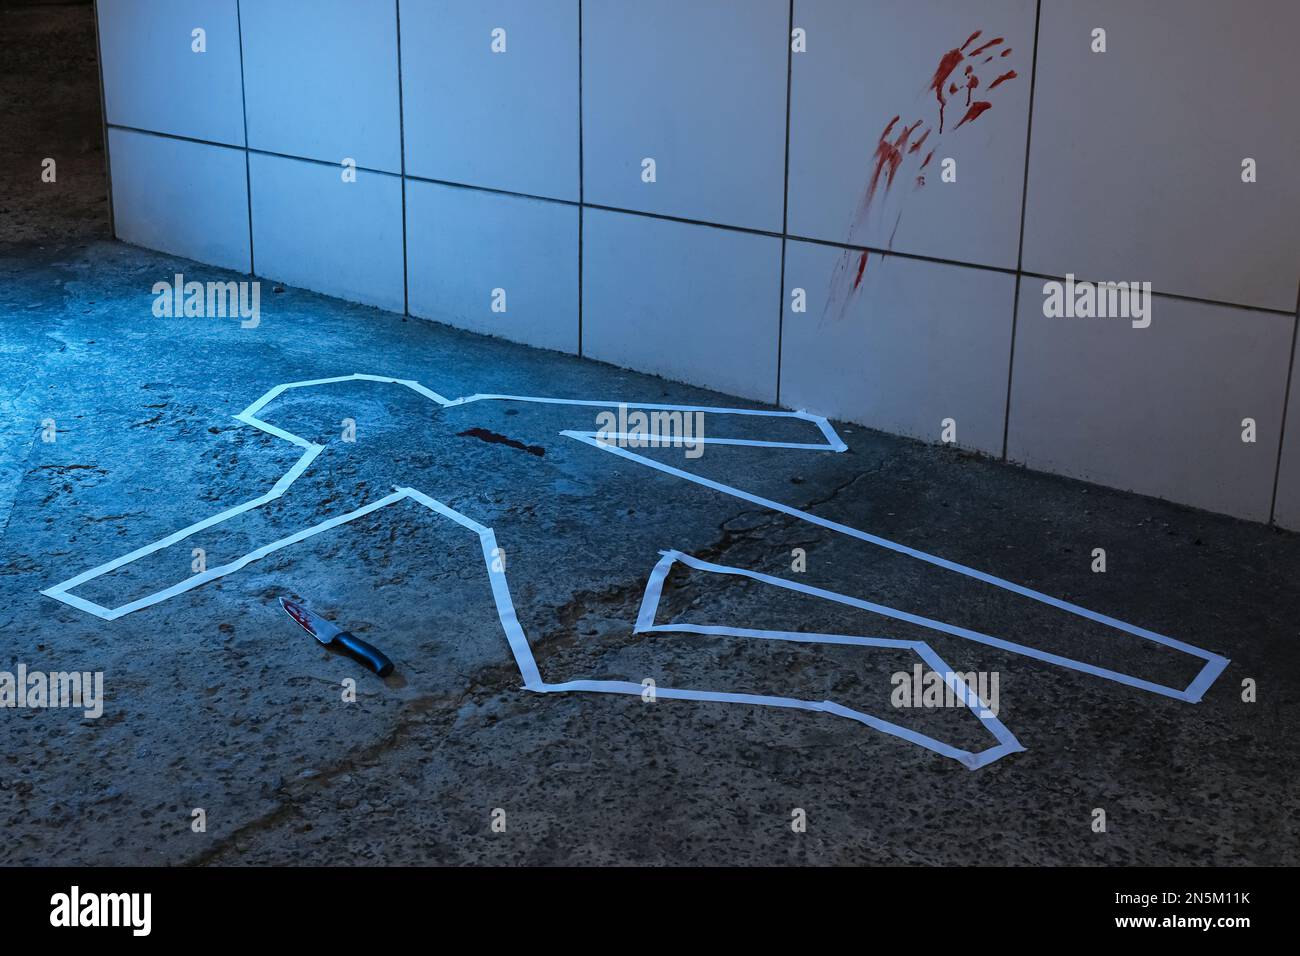 Crime scene with chalk outline, knife and blood marks on floor. Detective investigation Stock Photo